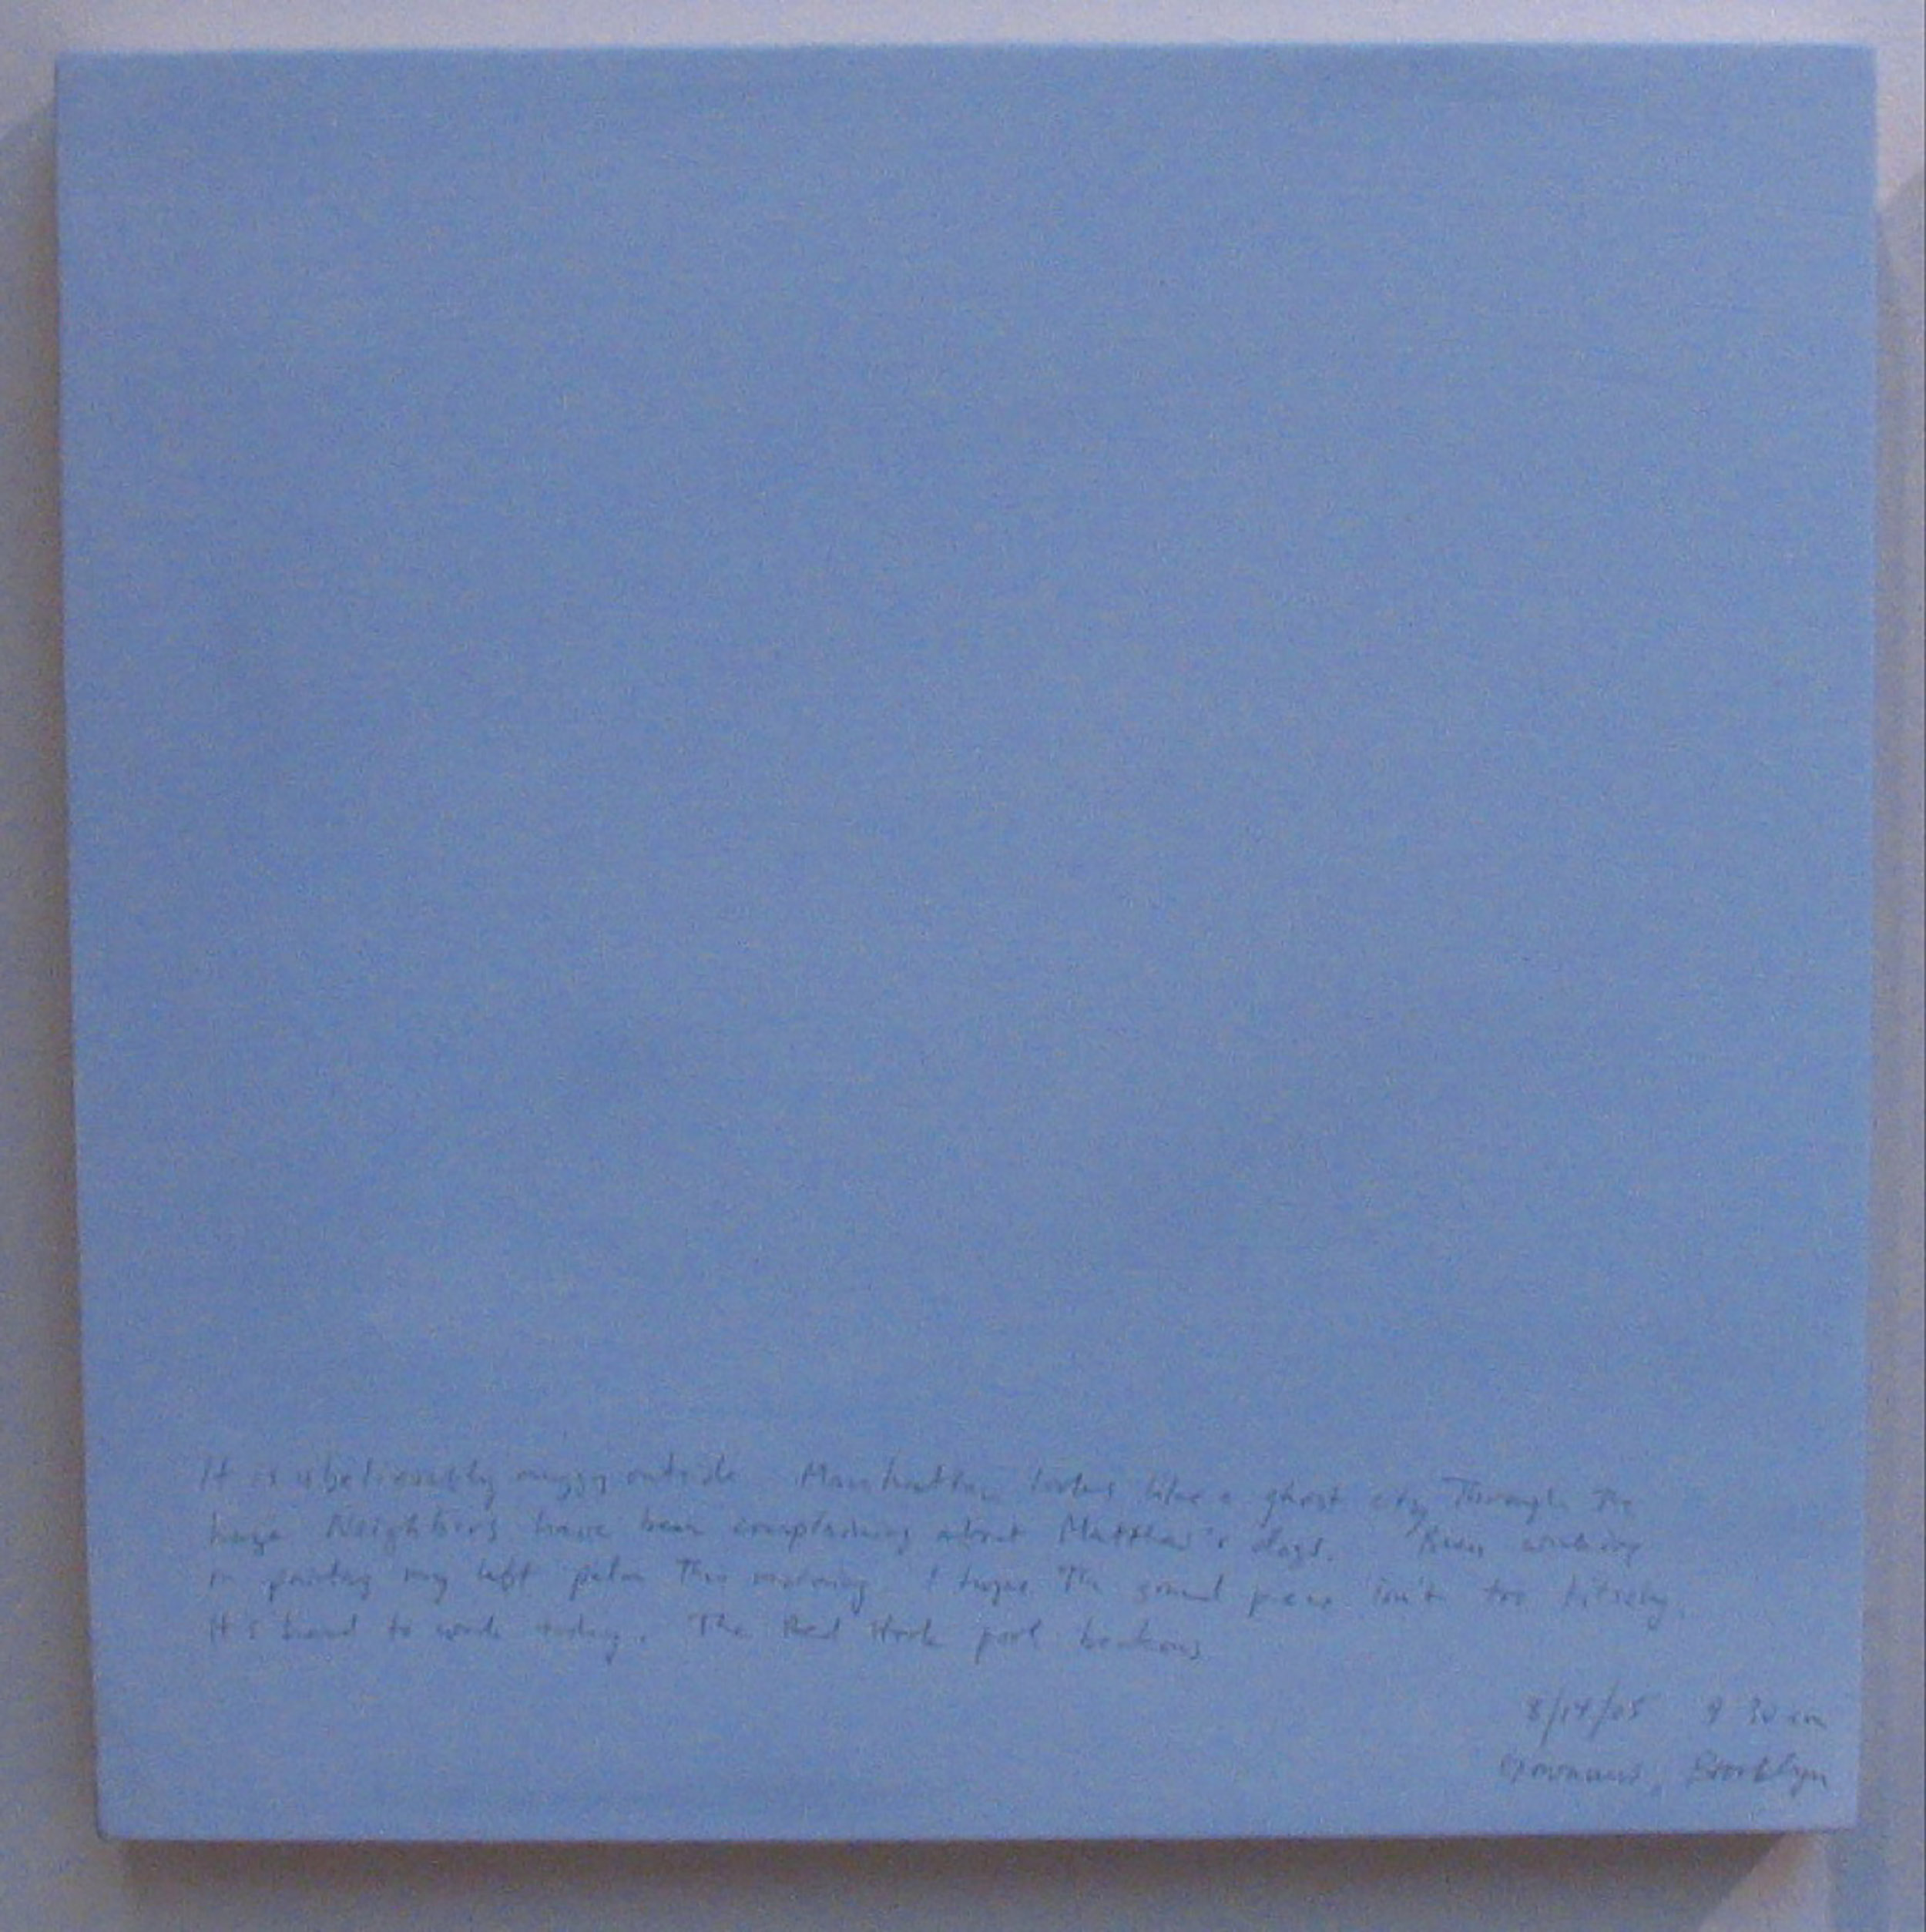 A 14 × 14 inch, acrylic painting of the sky. A journal entry is handwritten on the painting:

“It is unbelievably muggy outside. Manhattan looks like a ghost city through the haze. Neighbors have been complaining about Matthew’s dogs. Been working on painting my left palm this morning. I hope the sound piece isn’t too kitschy. It’s hard to work today. The Red Hook pool beckons.

8/14/05 9:30 am
Gowanus, Brooklyn”